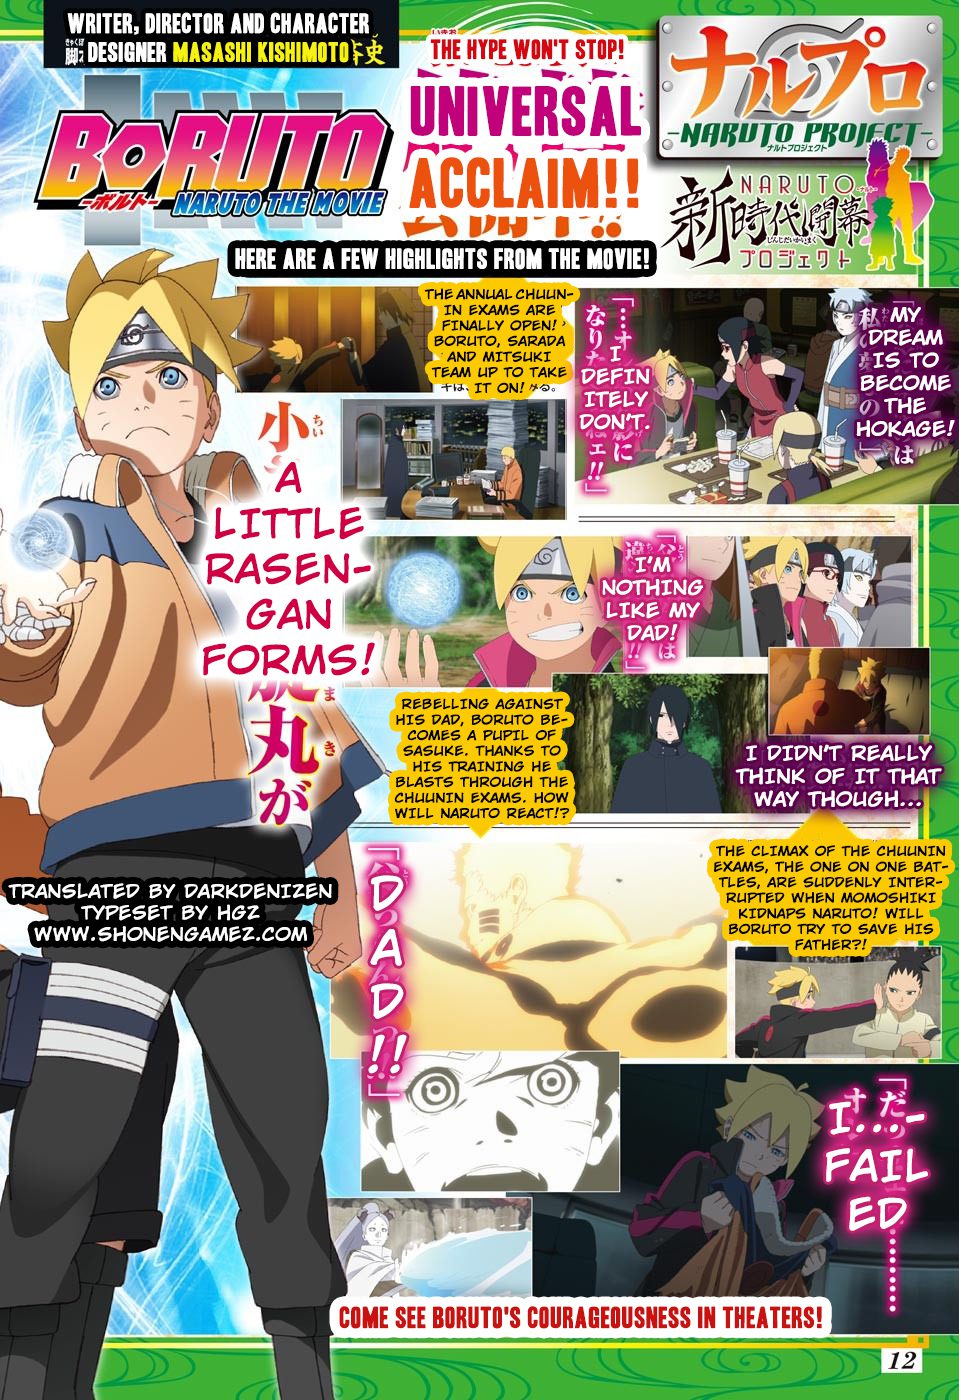 Naruto Shippuden on X: Boruto: Naruto the movie was released in Japanese  theatres on August 7, 2015, and in the United States with English subtitles  on October 10.  / X